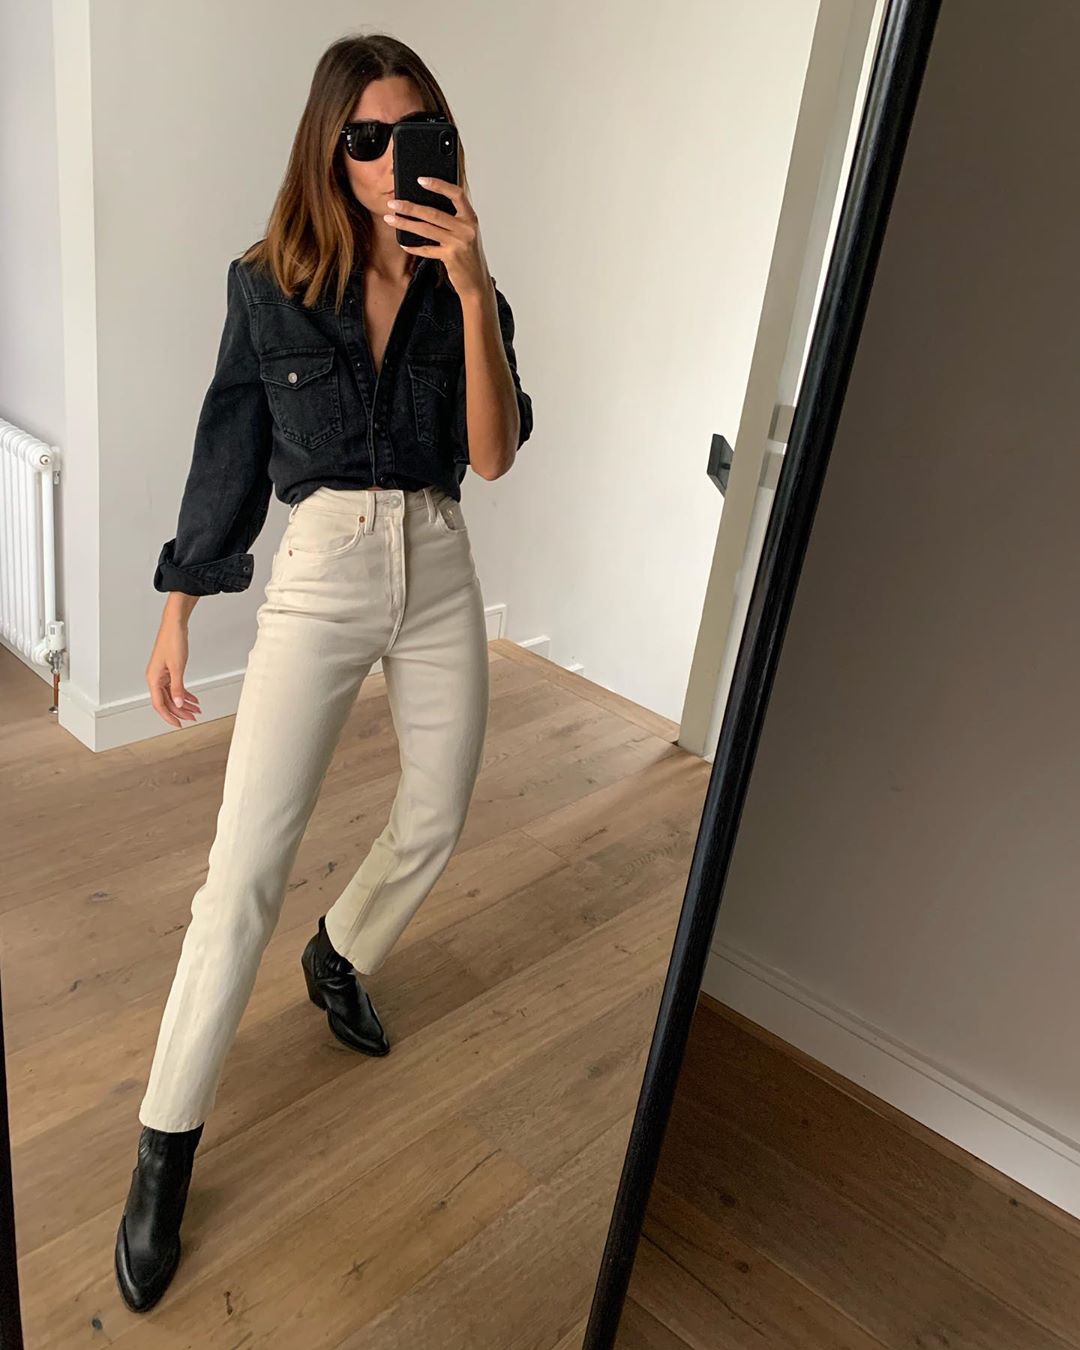 We're Obsessed With Beige Jeans Thanks to This Instagram Look